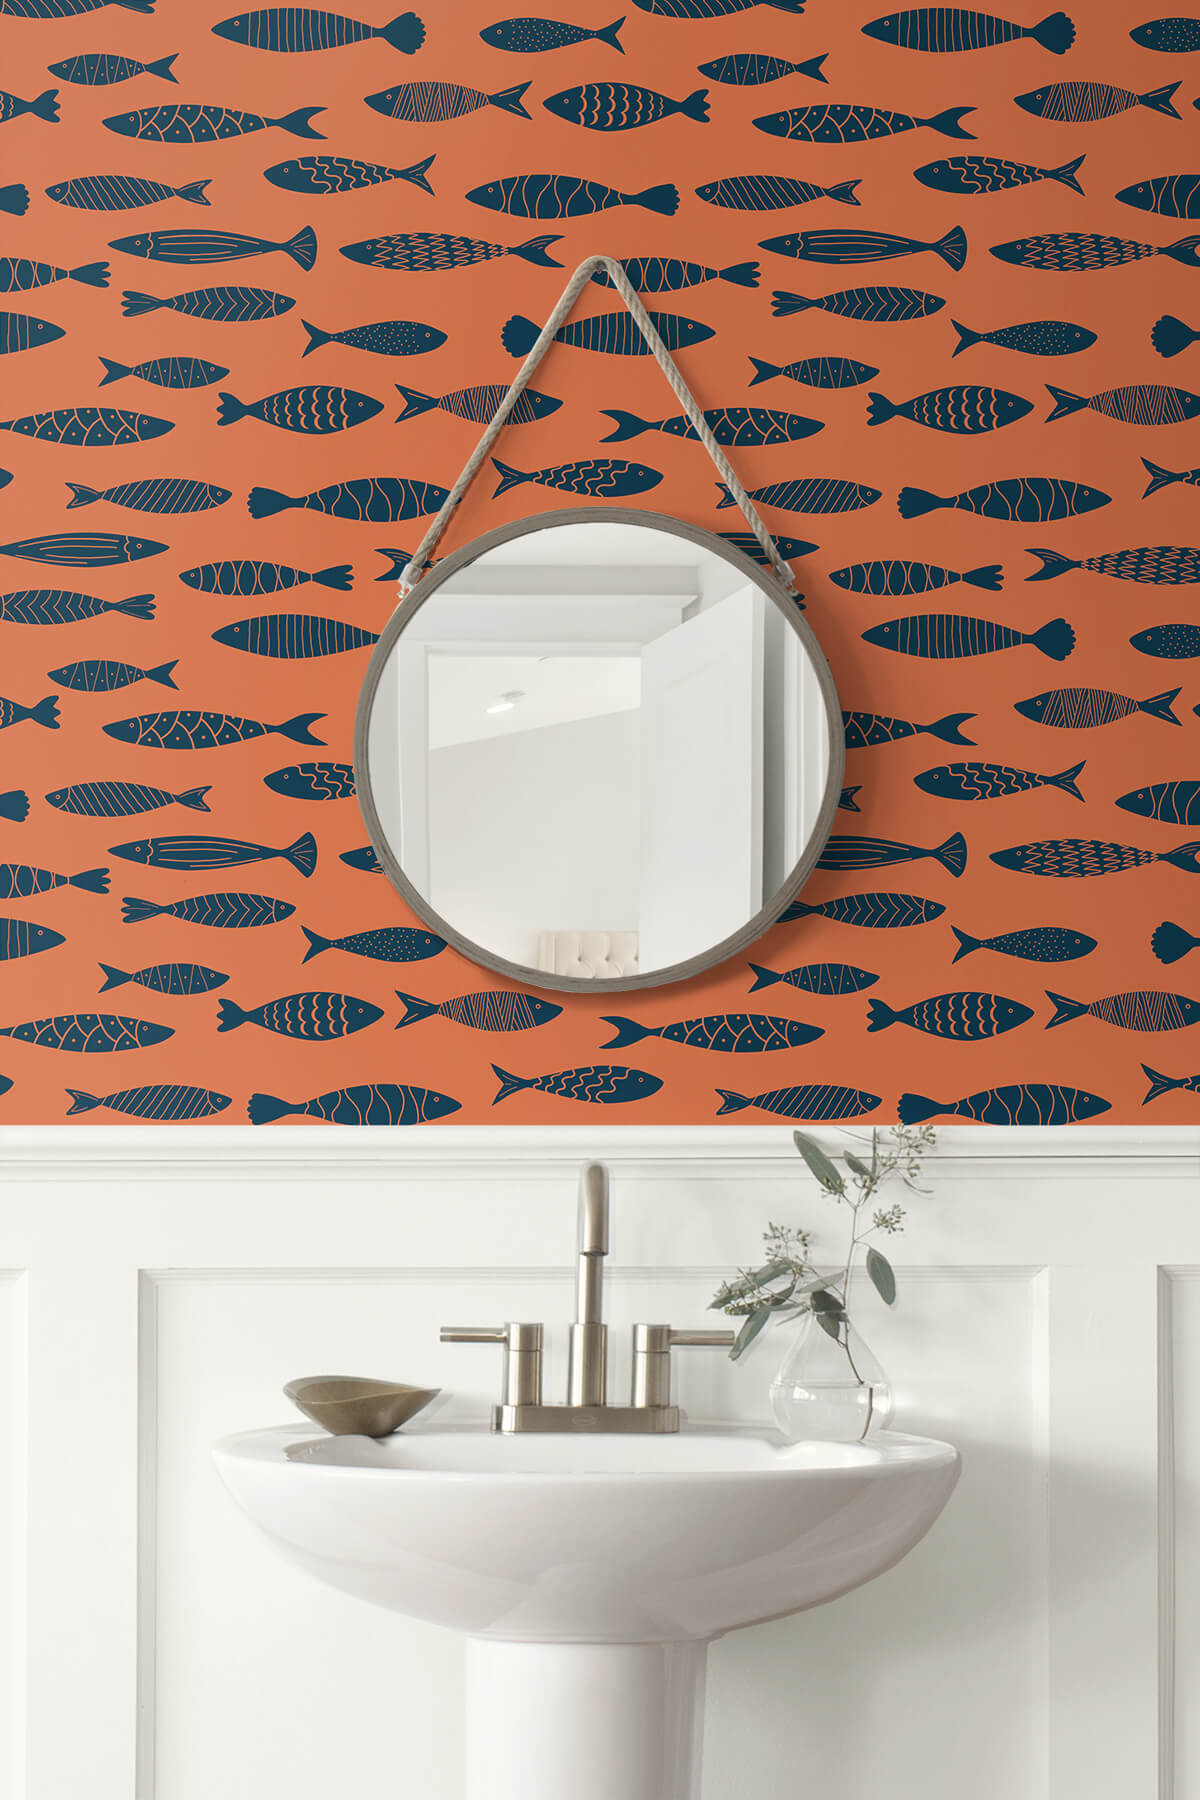 Seabrook Summer House Bay Fish Wallpaper - Coral Reef